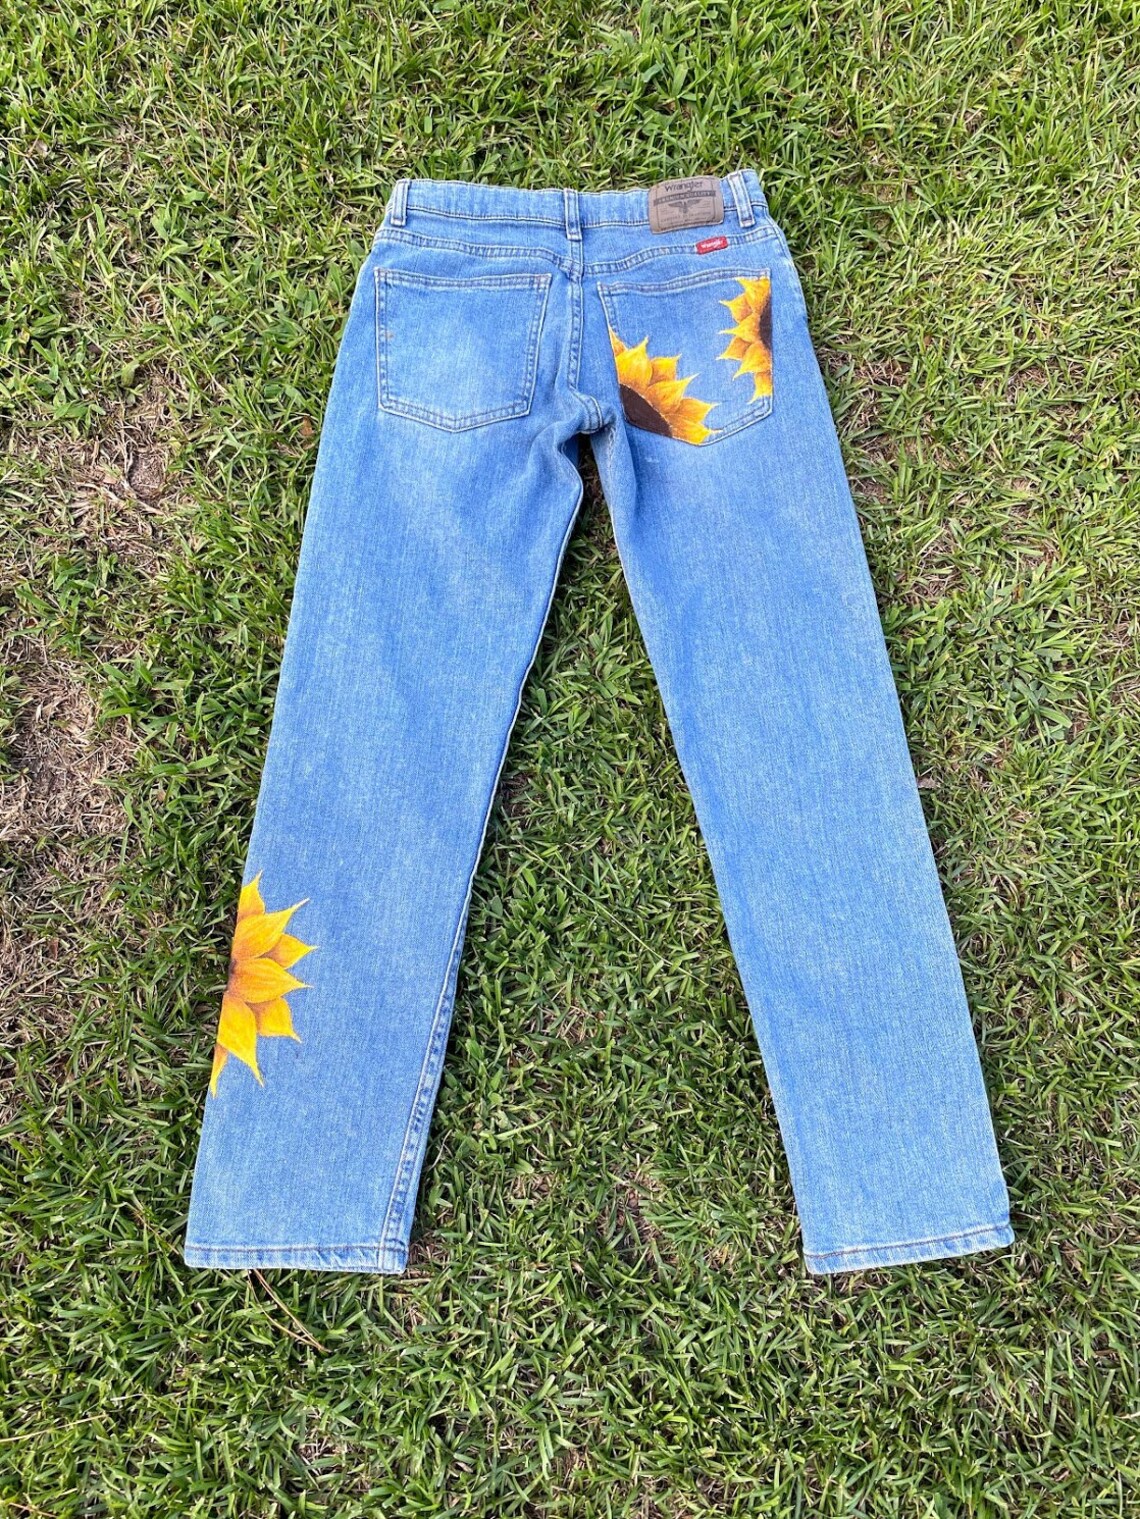 Hand Painted Sunflower Jeans | Etsy